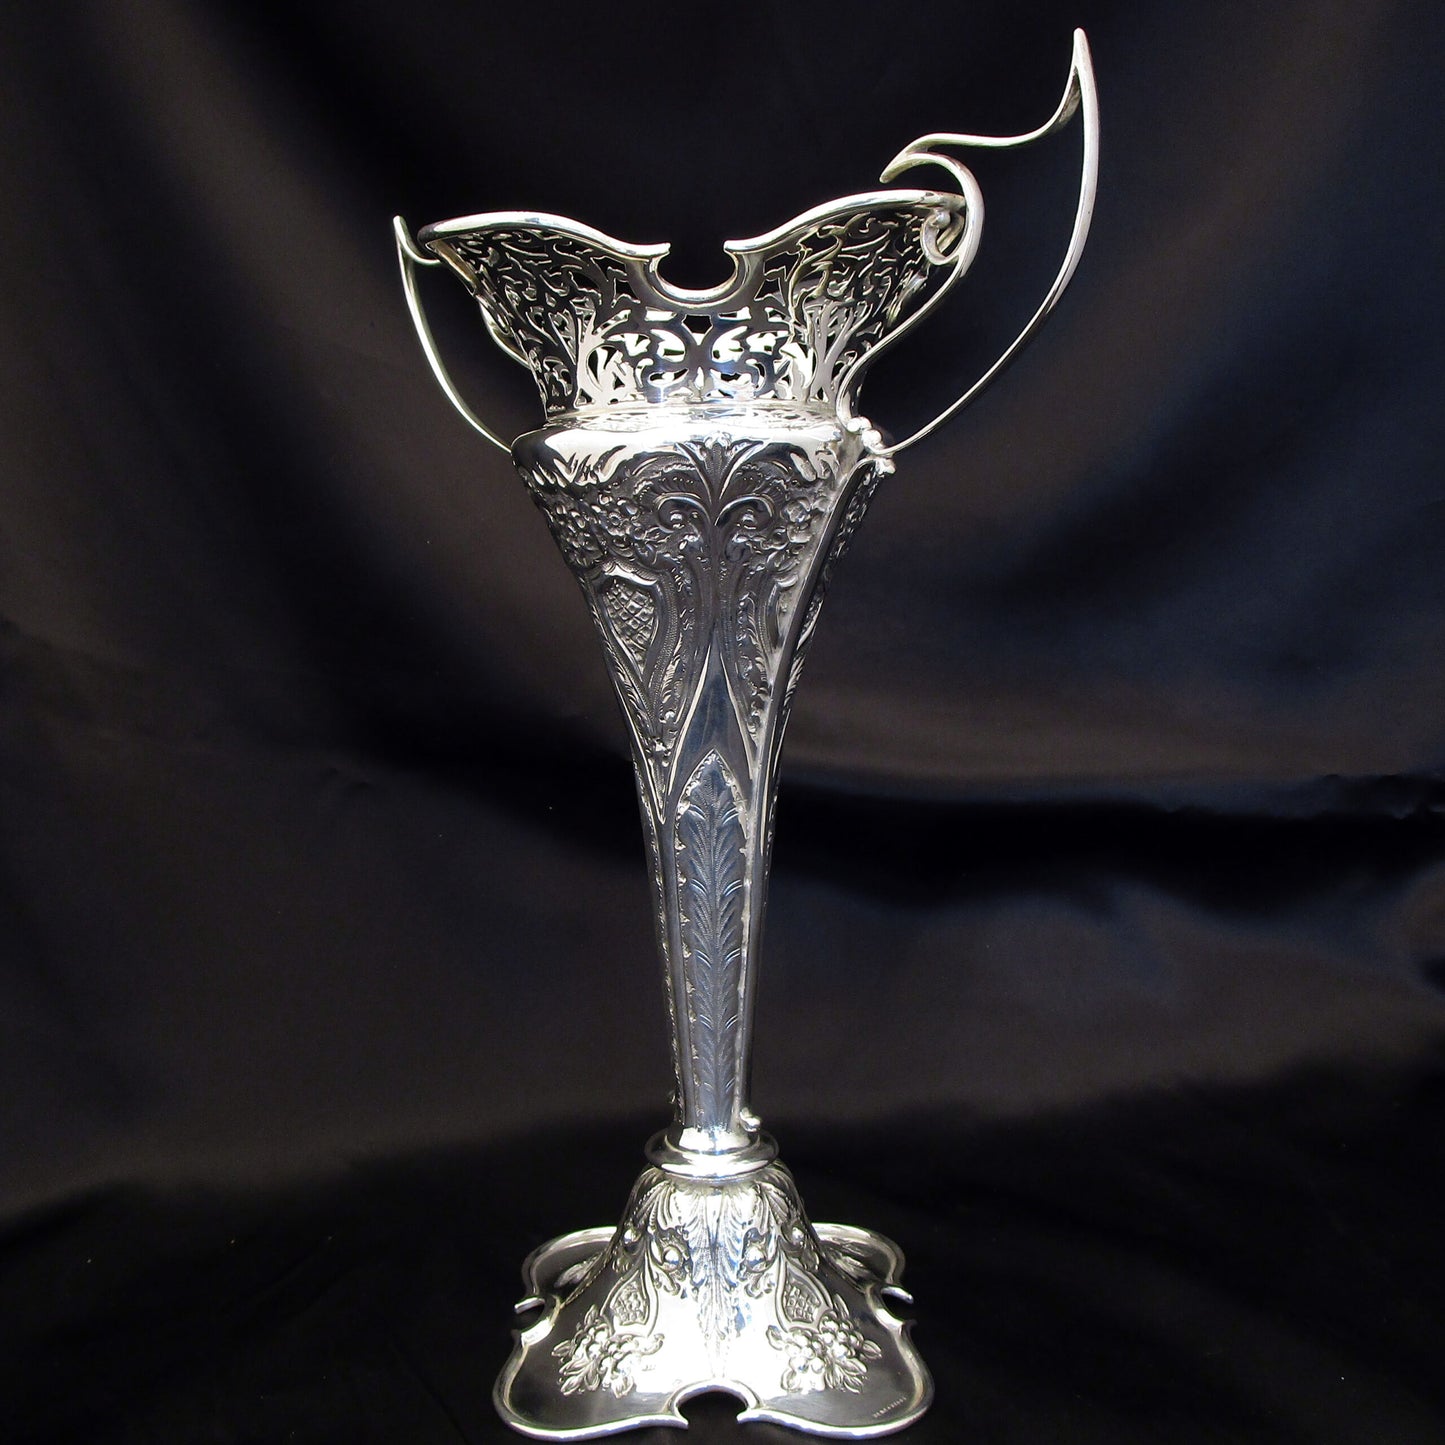 A pair of large sterling silver pierced and embossed vases by Walker & Hall.